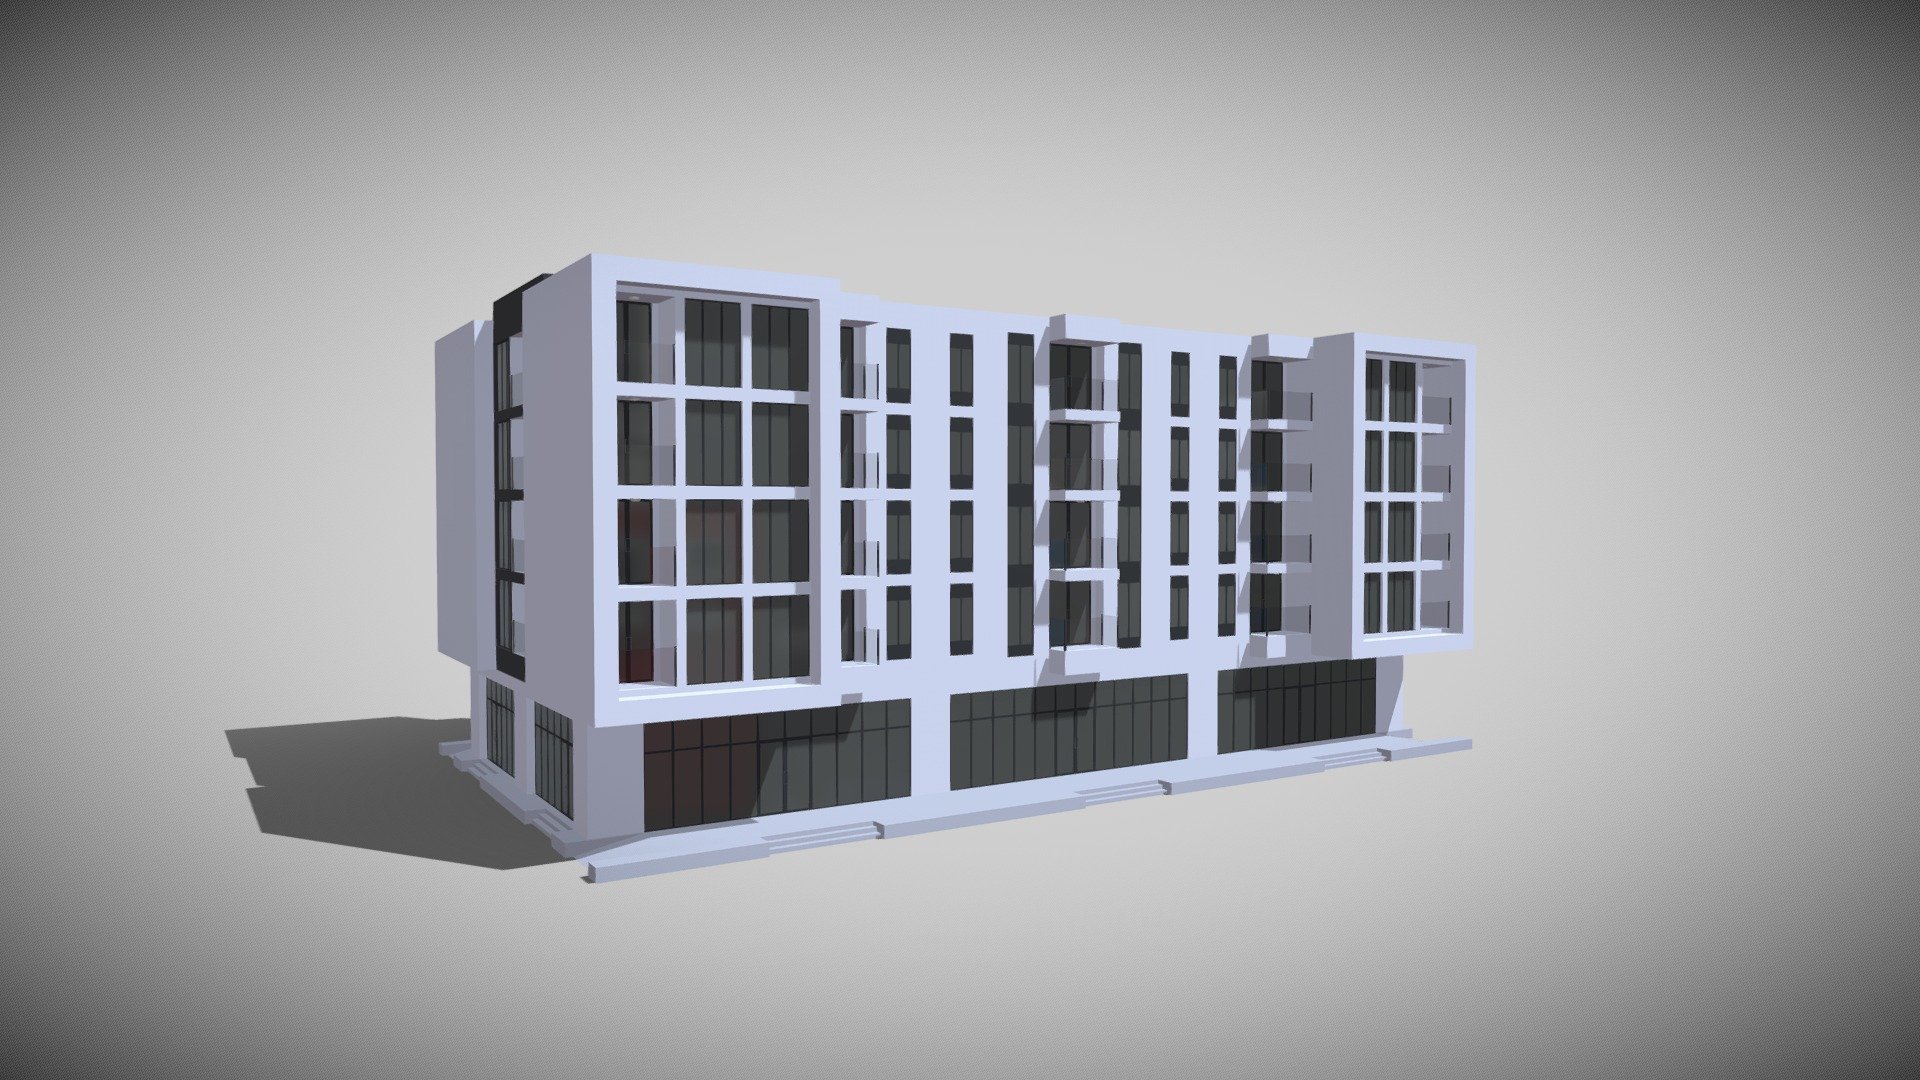 Detailed model of an Apartment Building with no interior, modeled in Cinema 4D.The model was created using approximate real world dimensions.

The model has 45,807 polys and 53,714 vertices.

An additional file has been provided containing the original Cinema 4D project files and other 3d export files such as 3ds, fbx and obj 3d model